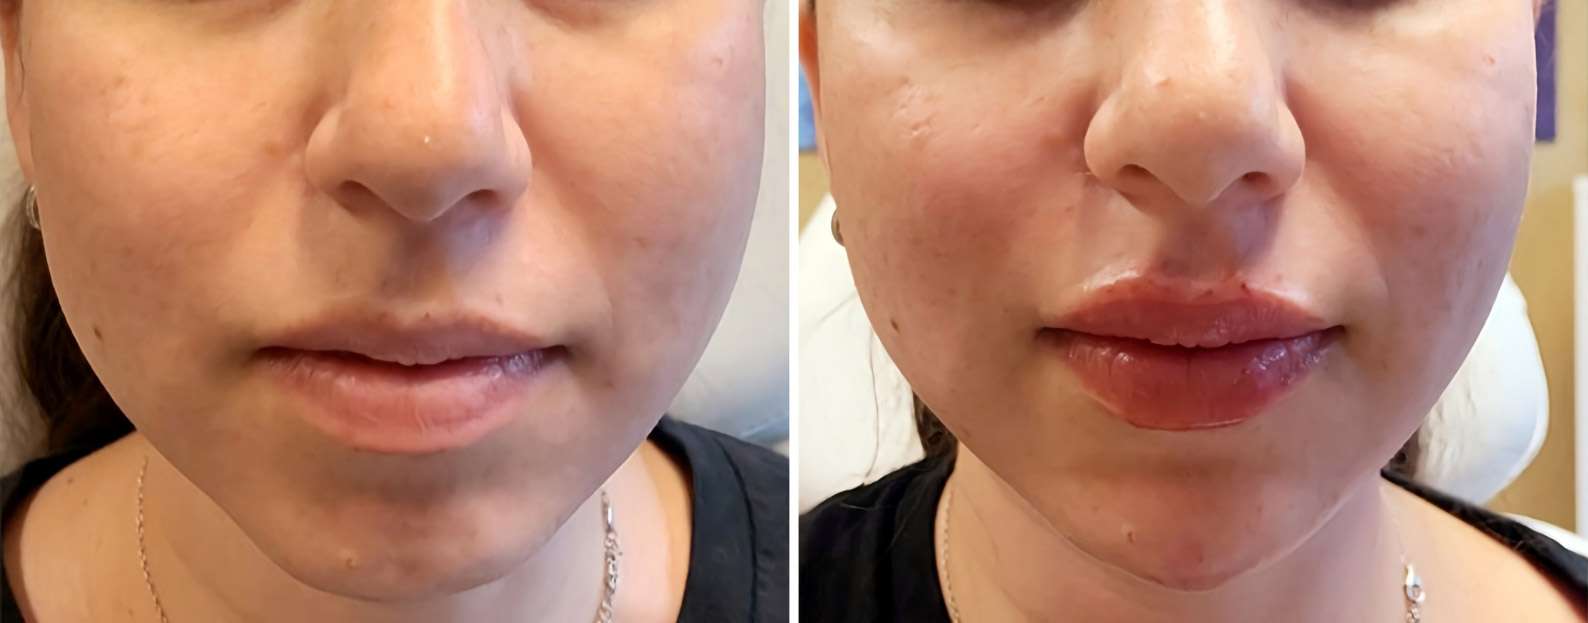 Before and after images of a patient that got Chin and Lip Fillers at Forward Healthy Lifestyles